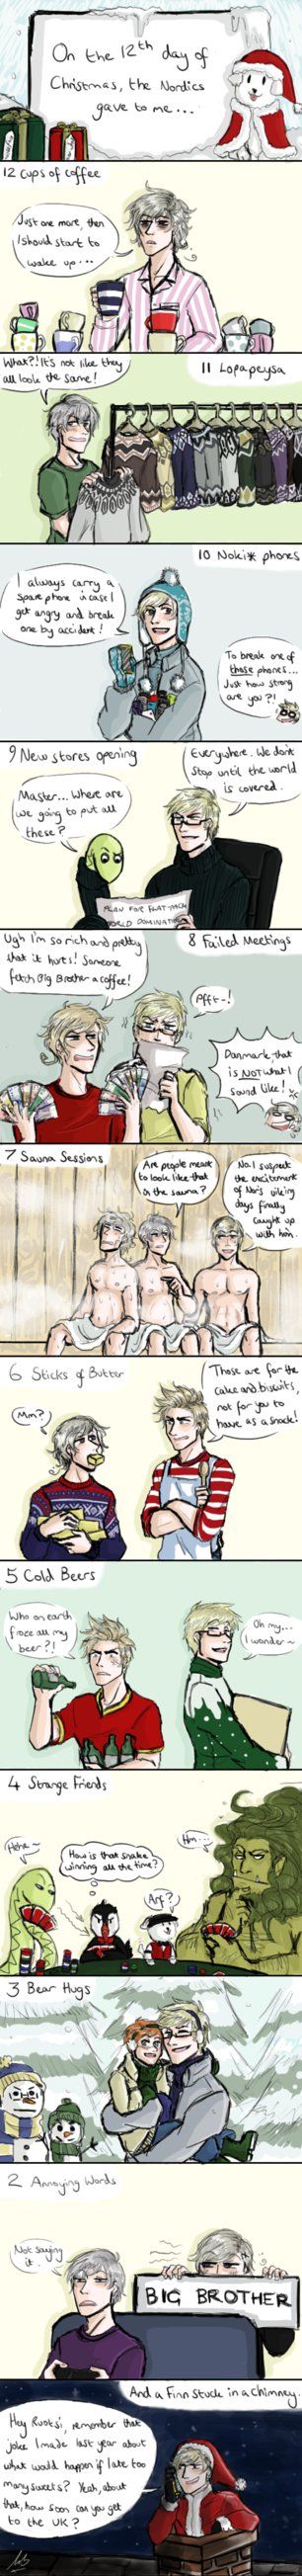 12 Days of Nordic by maivalkov on DeviantArt //does it make you late if you in a different time zone